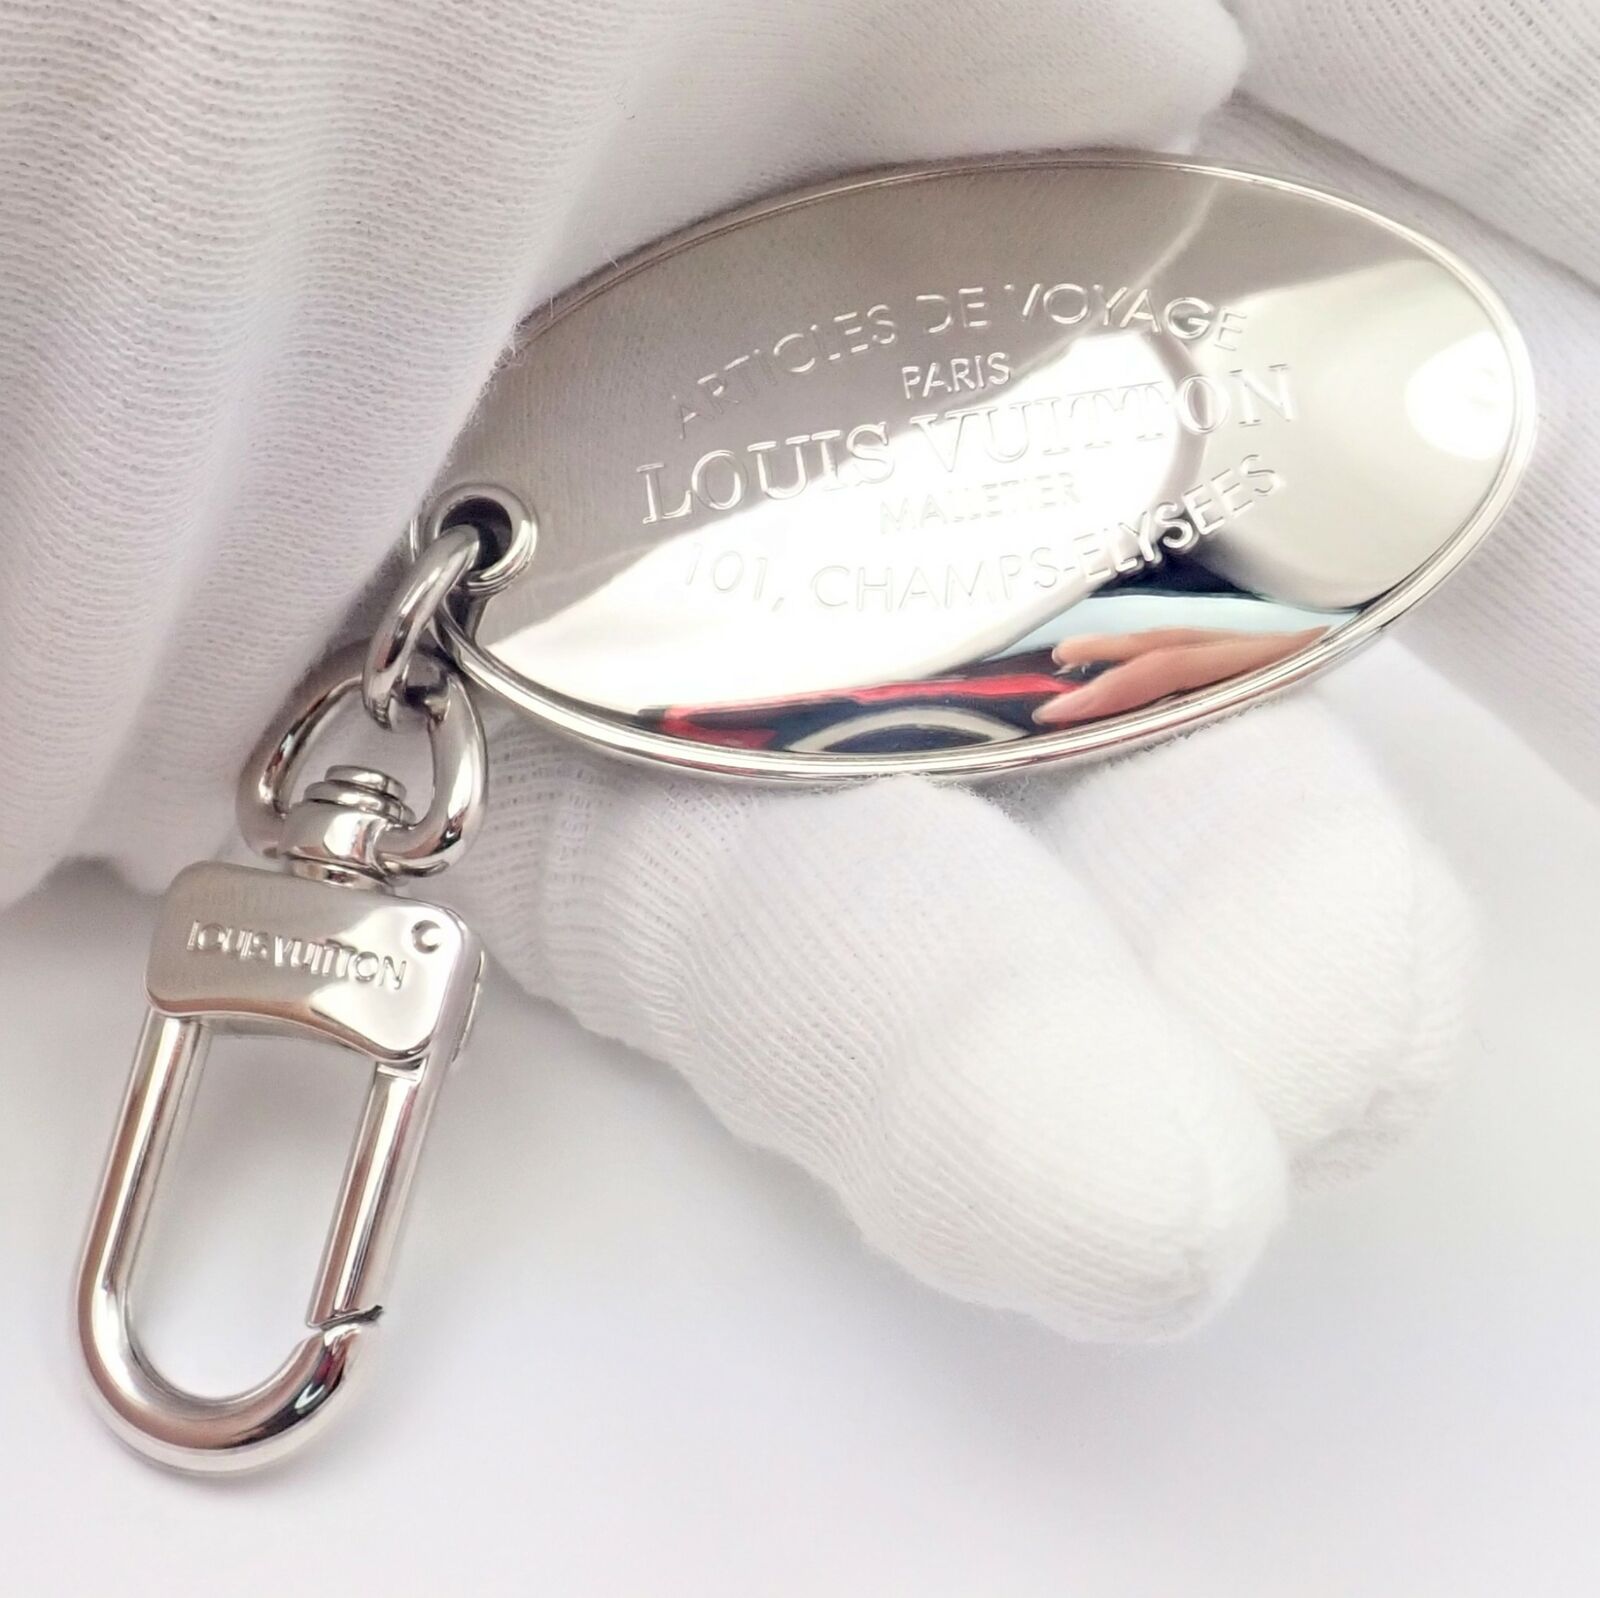 Louis Vuitton Clothing, Shoes & Accessories:Women:Women's Accessories:Key Chains, Rings & Finders Authentic Louis Vuitton LV Large Stainless Steel Luggage Tag Key Chain CK 1100